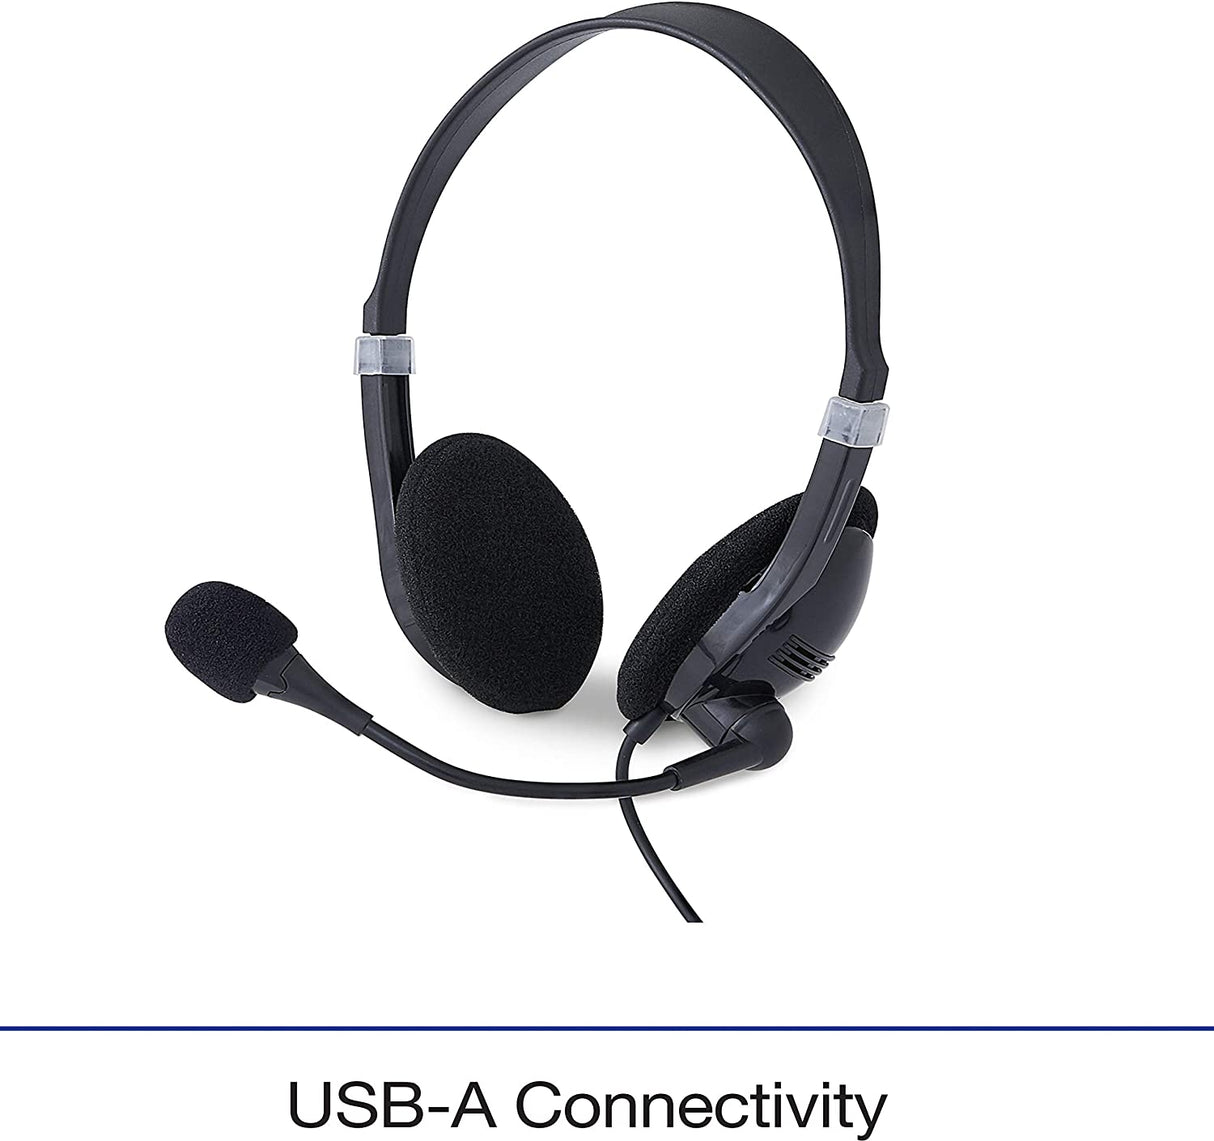 Verbatim Stereo USB Headset with Microphone and in-Line Remote Stereo w/In-Line Remote